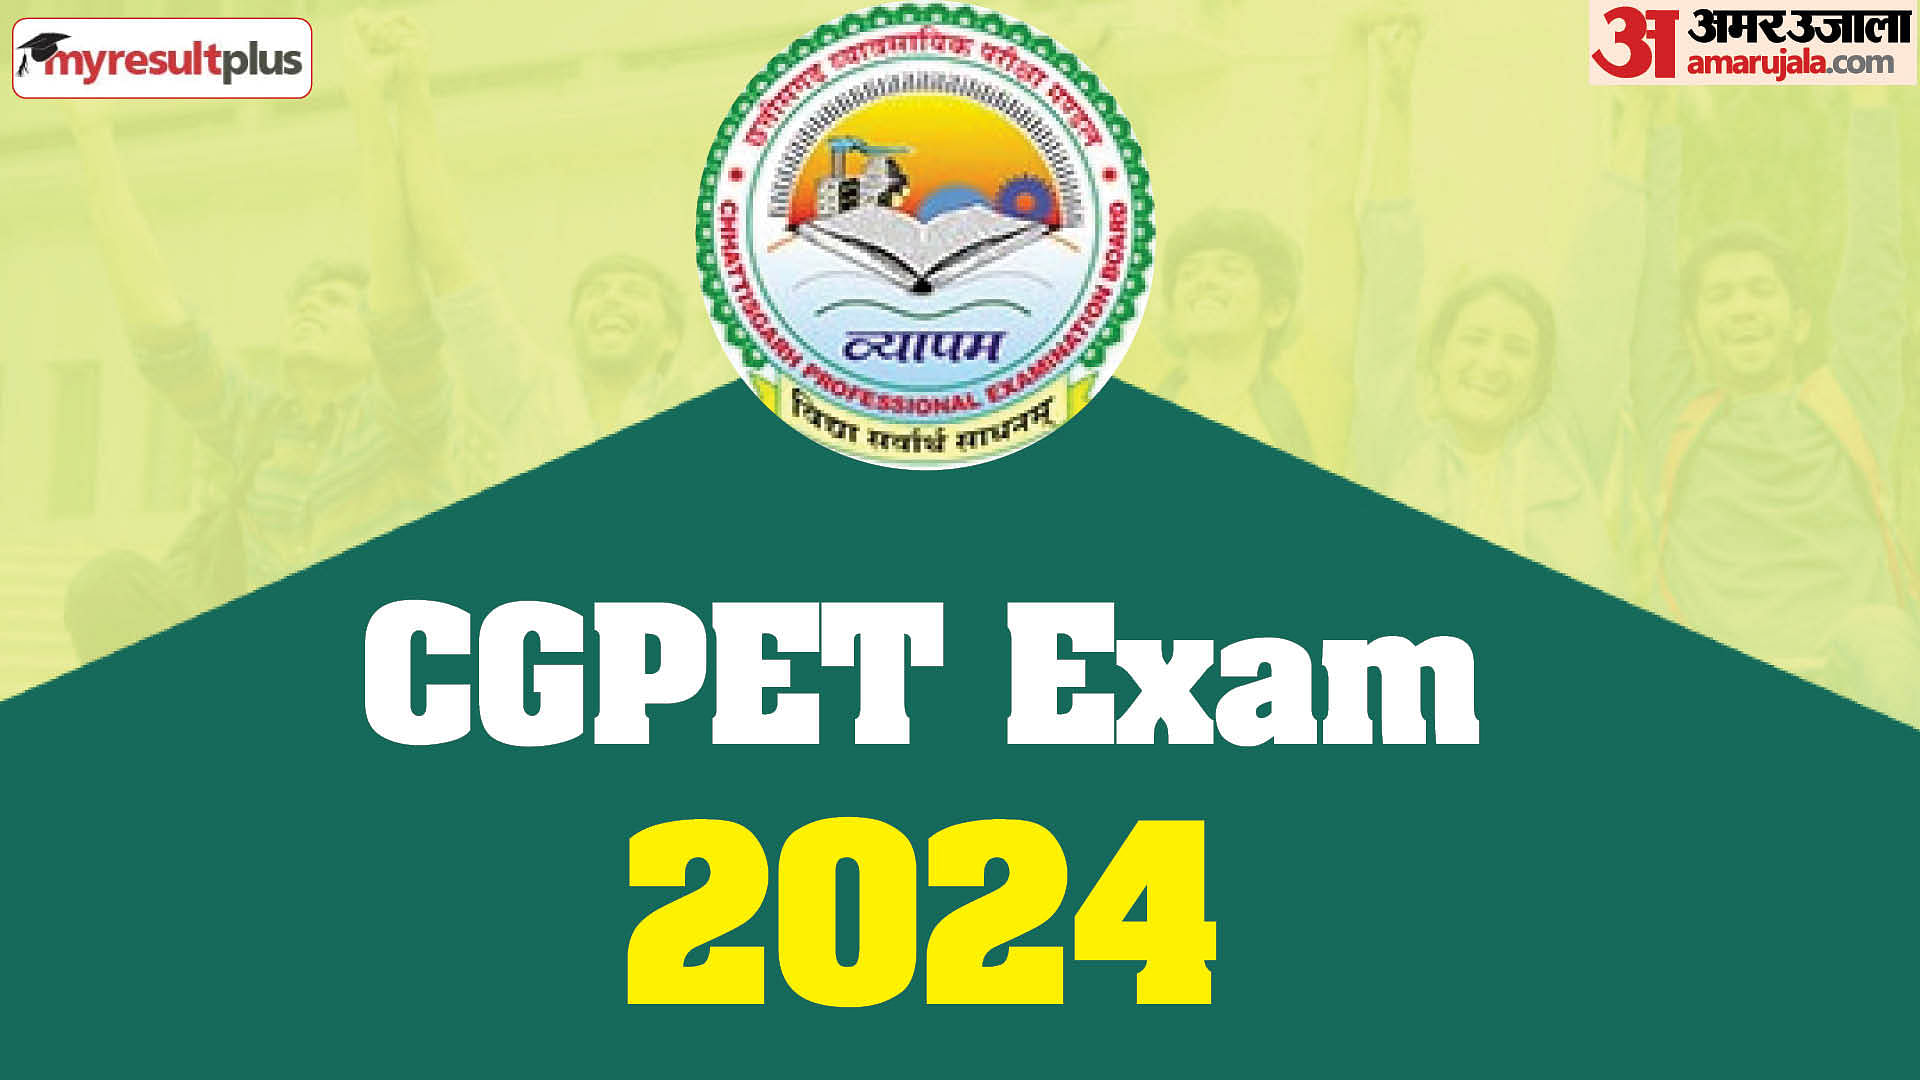 CGPET 2024 Registration window open now, Apply at cpget.tsche.ac.in, Read about the exam pattern here